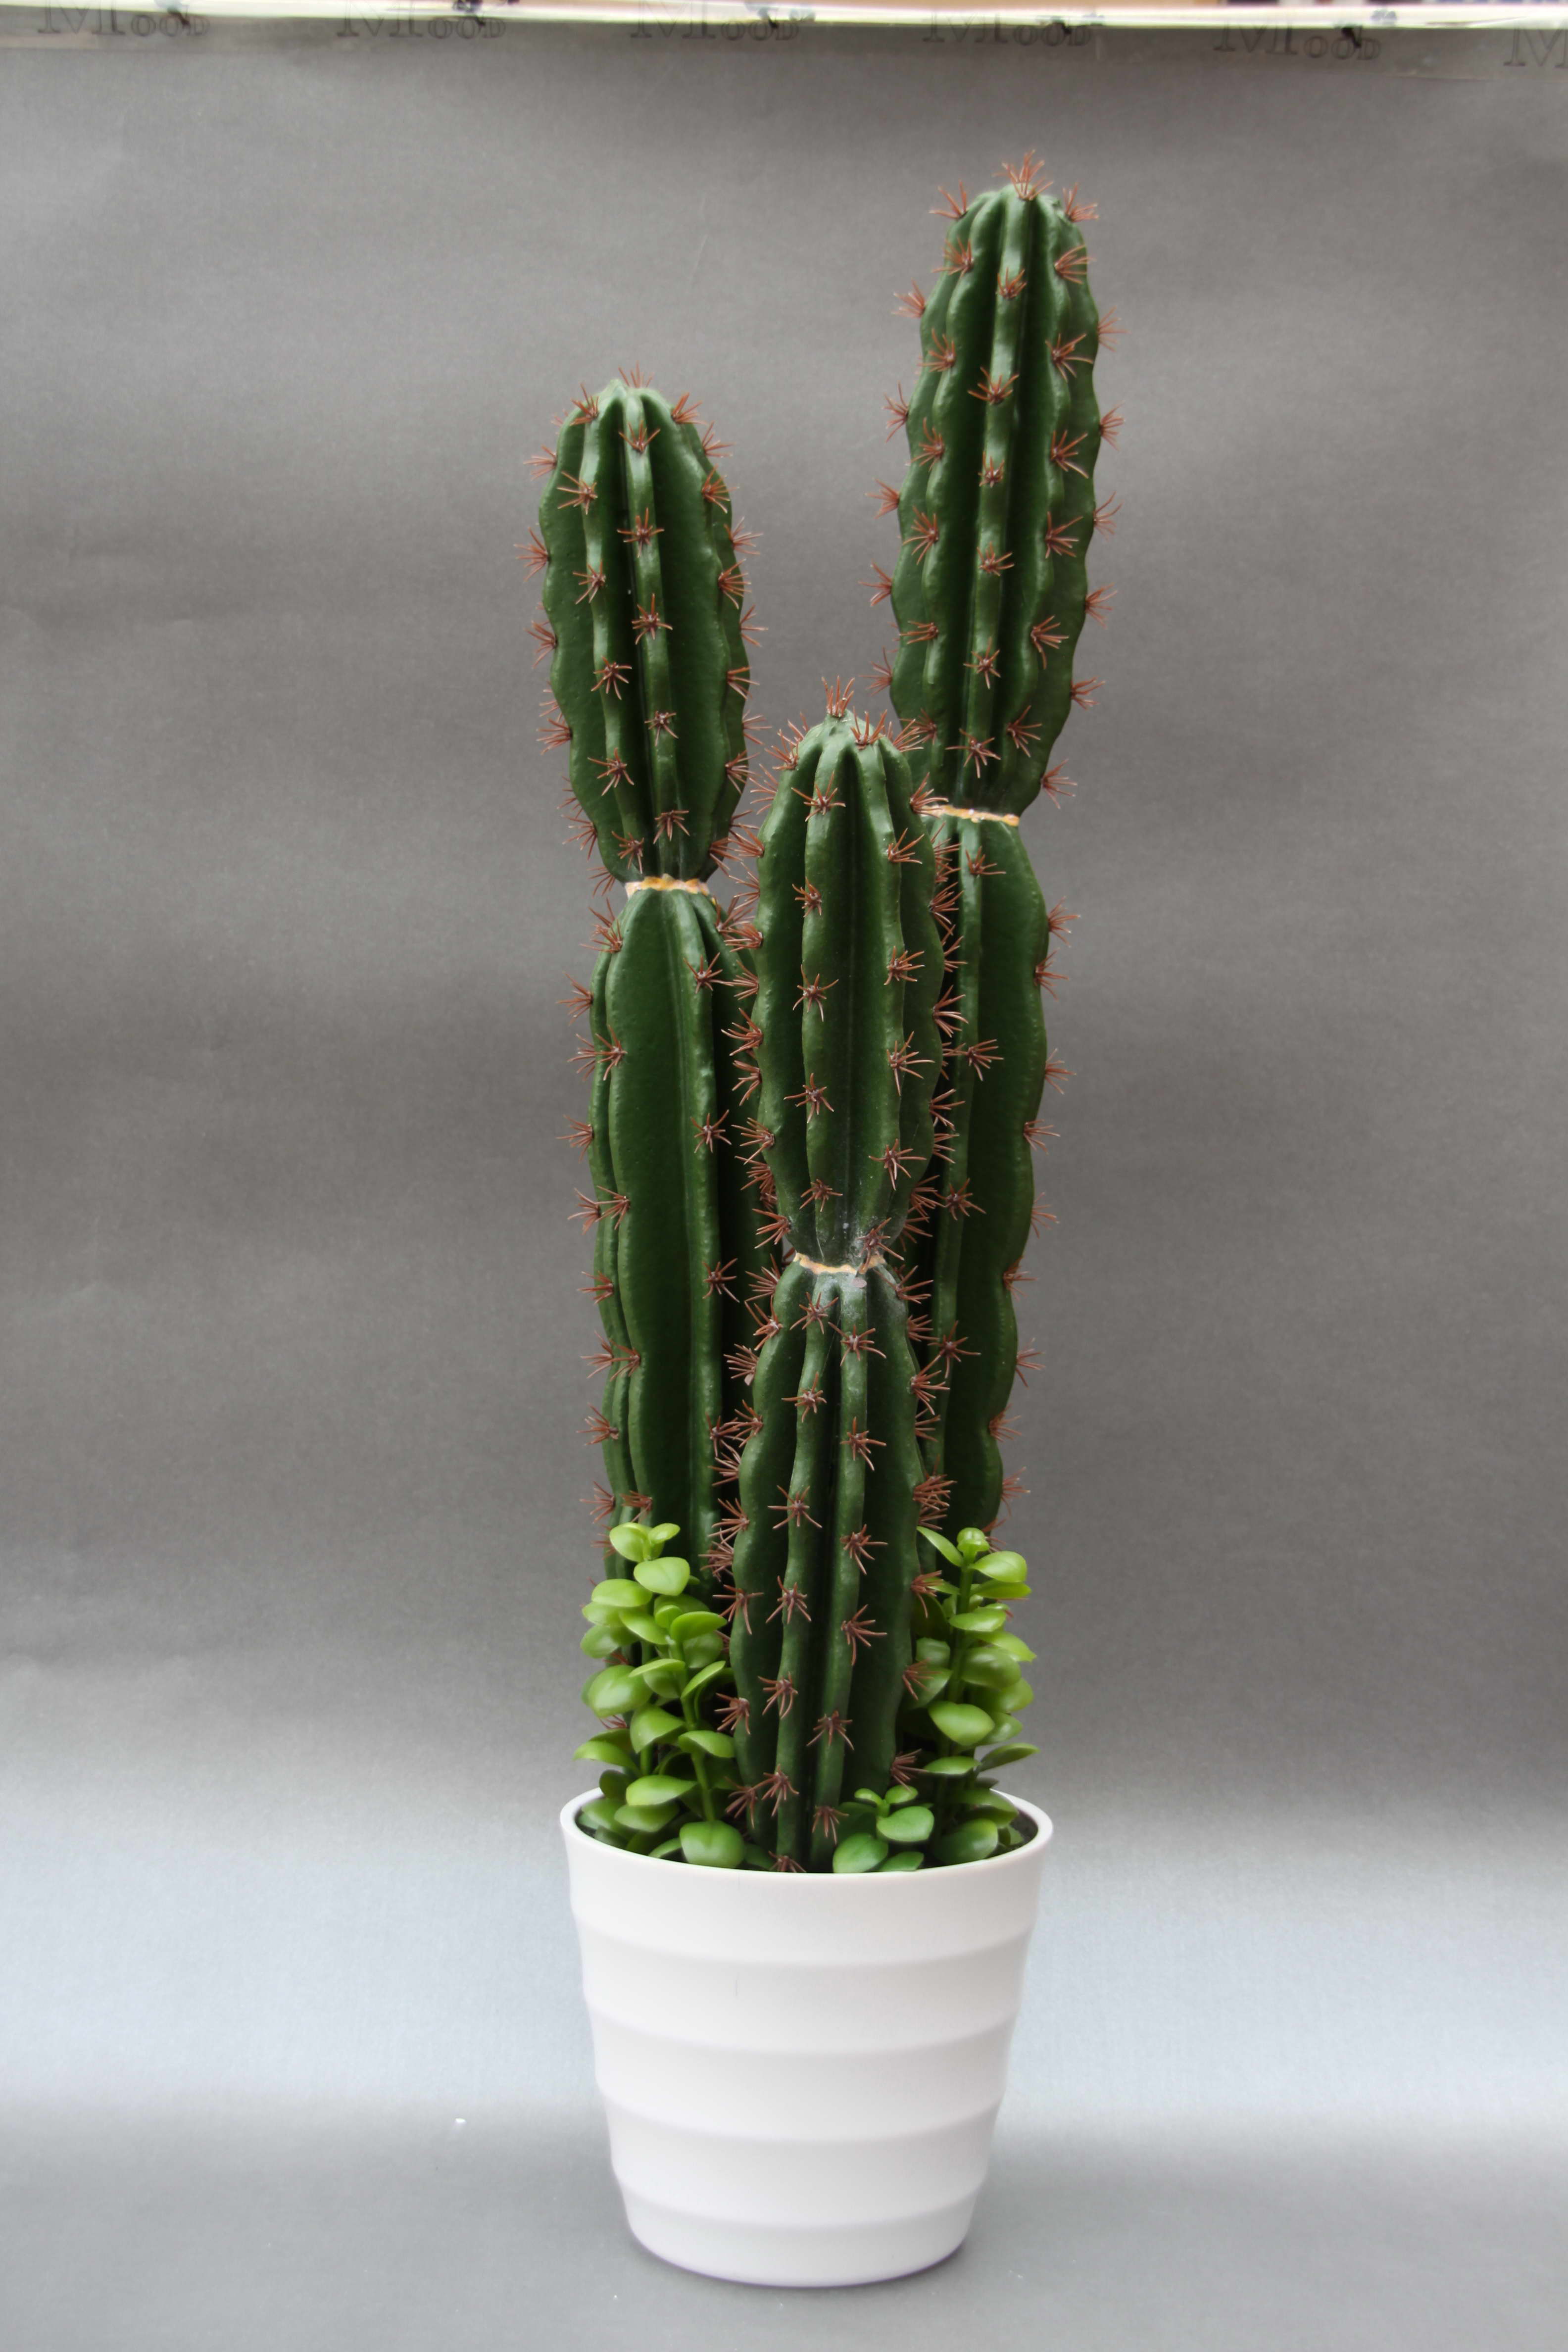 Chinese plastic three to 8 ribbed cactus simulation plant home decoration1